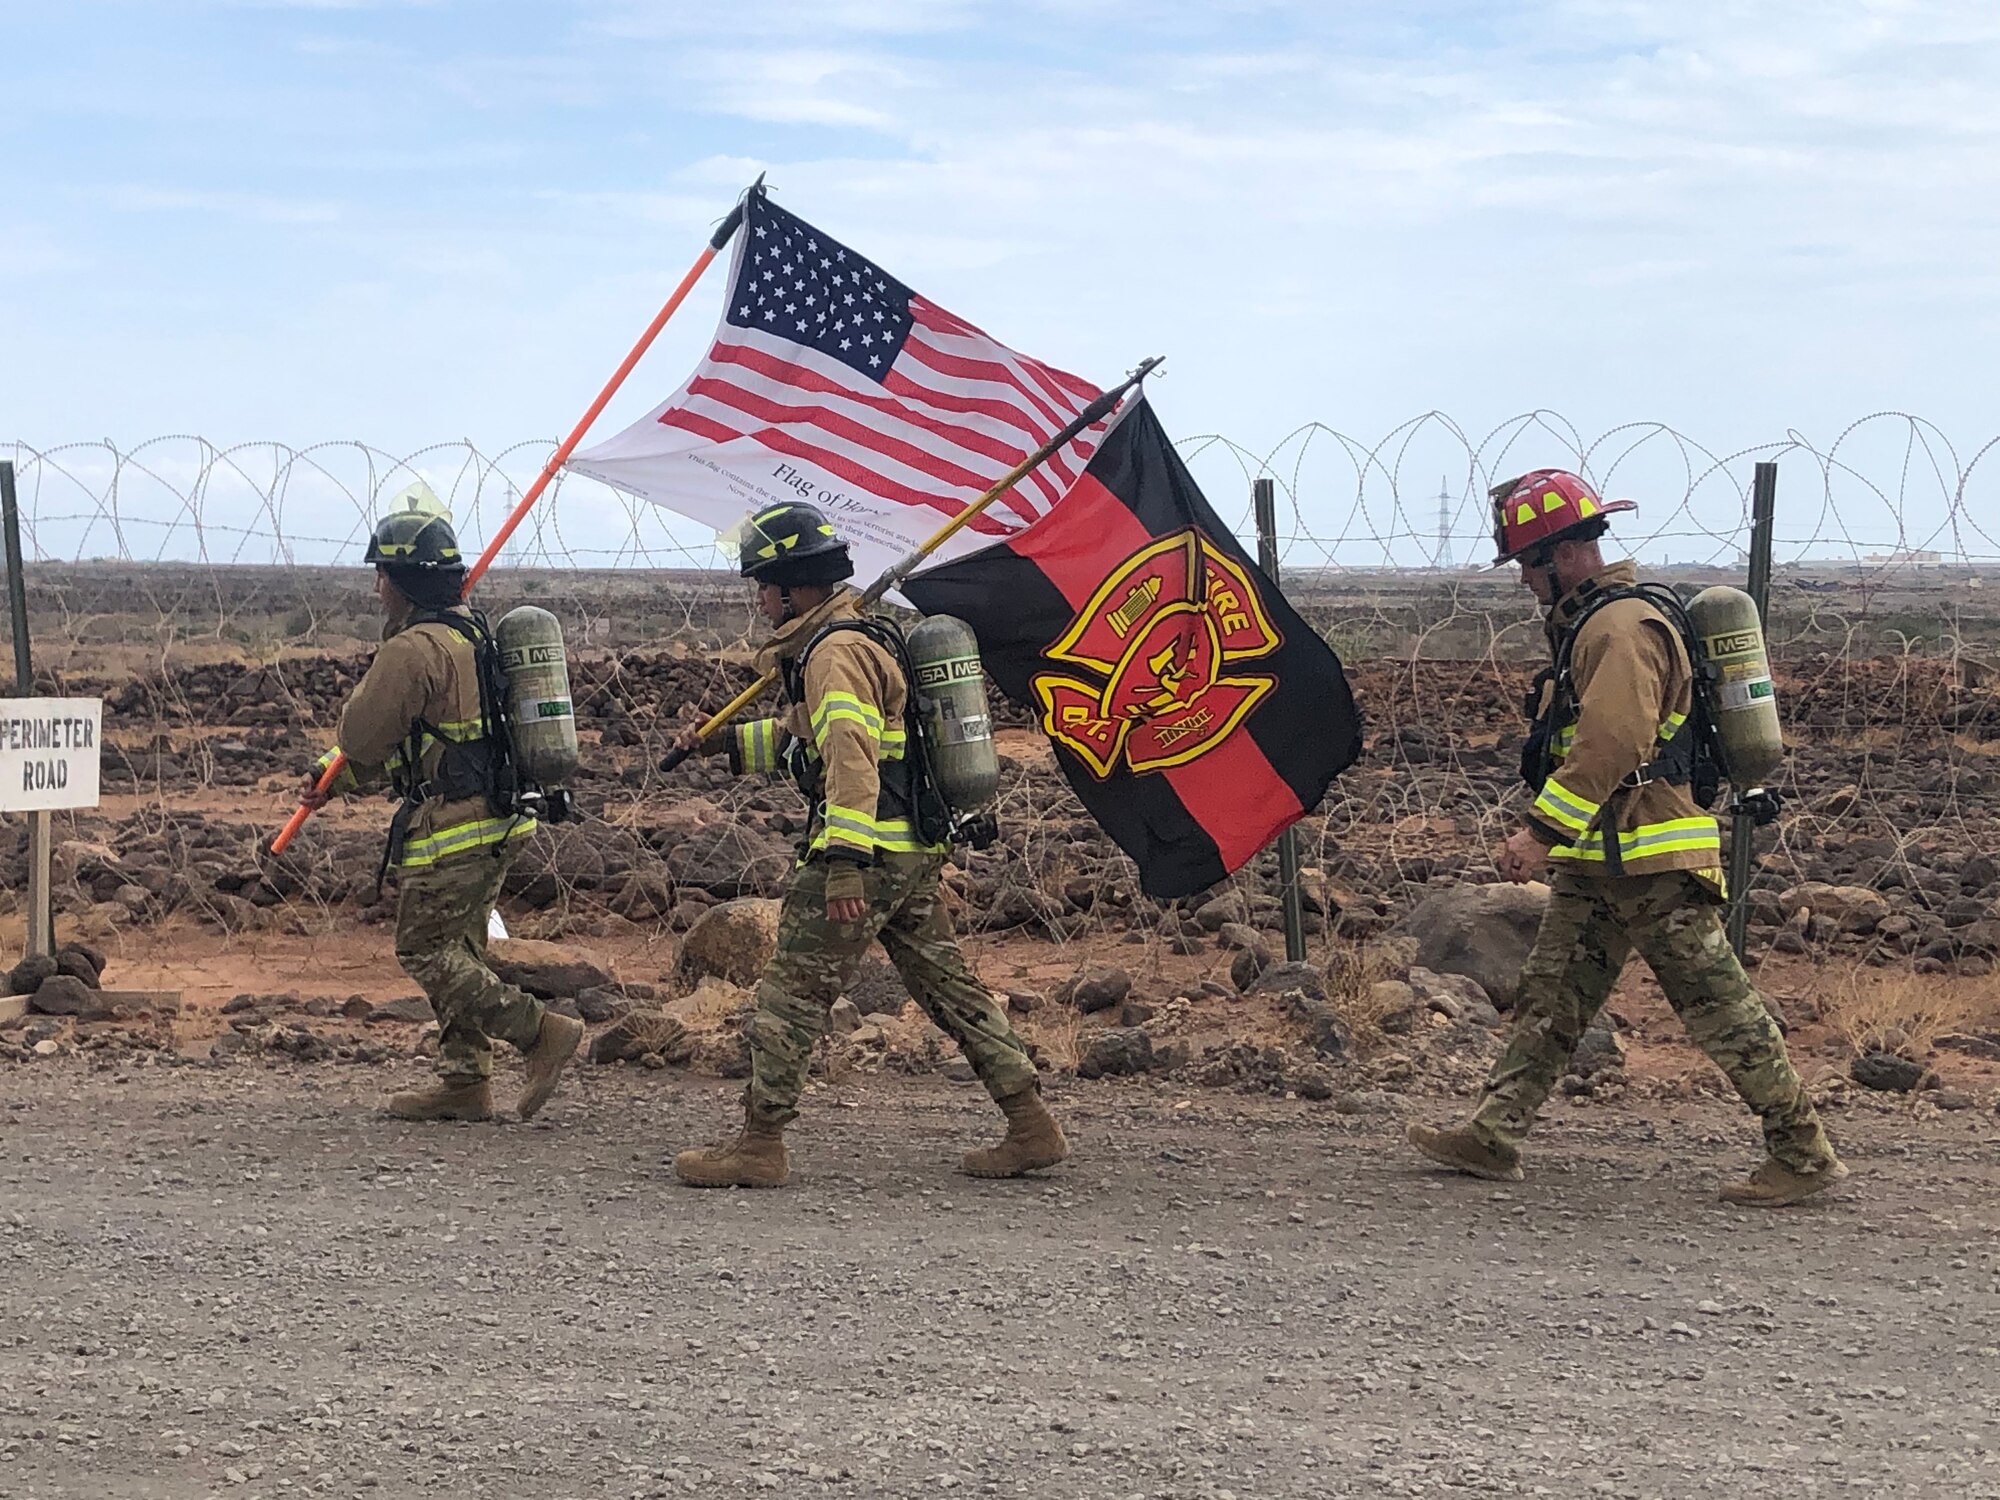 Firefighters assigned to the 726th Expeditionary Air Base Squadron participate in a ruck march at Chabelley Airfield, Djibouti, Sept. 11, 2020. The fire emergency service flight walked the perimeter of the base while carrying flags in remembrance of the 2,977 victims of the Sept. 11, 2001 attacks, with a special dedication to the 343 firefighters who tragically lost their lives that day. (Courtesy Photo)